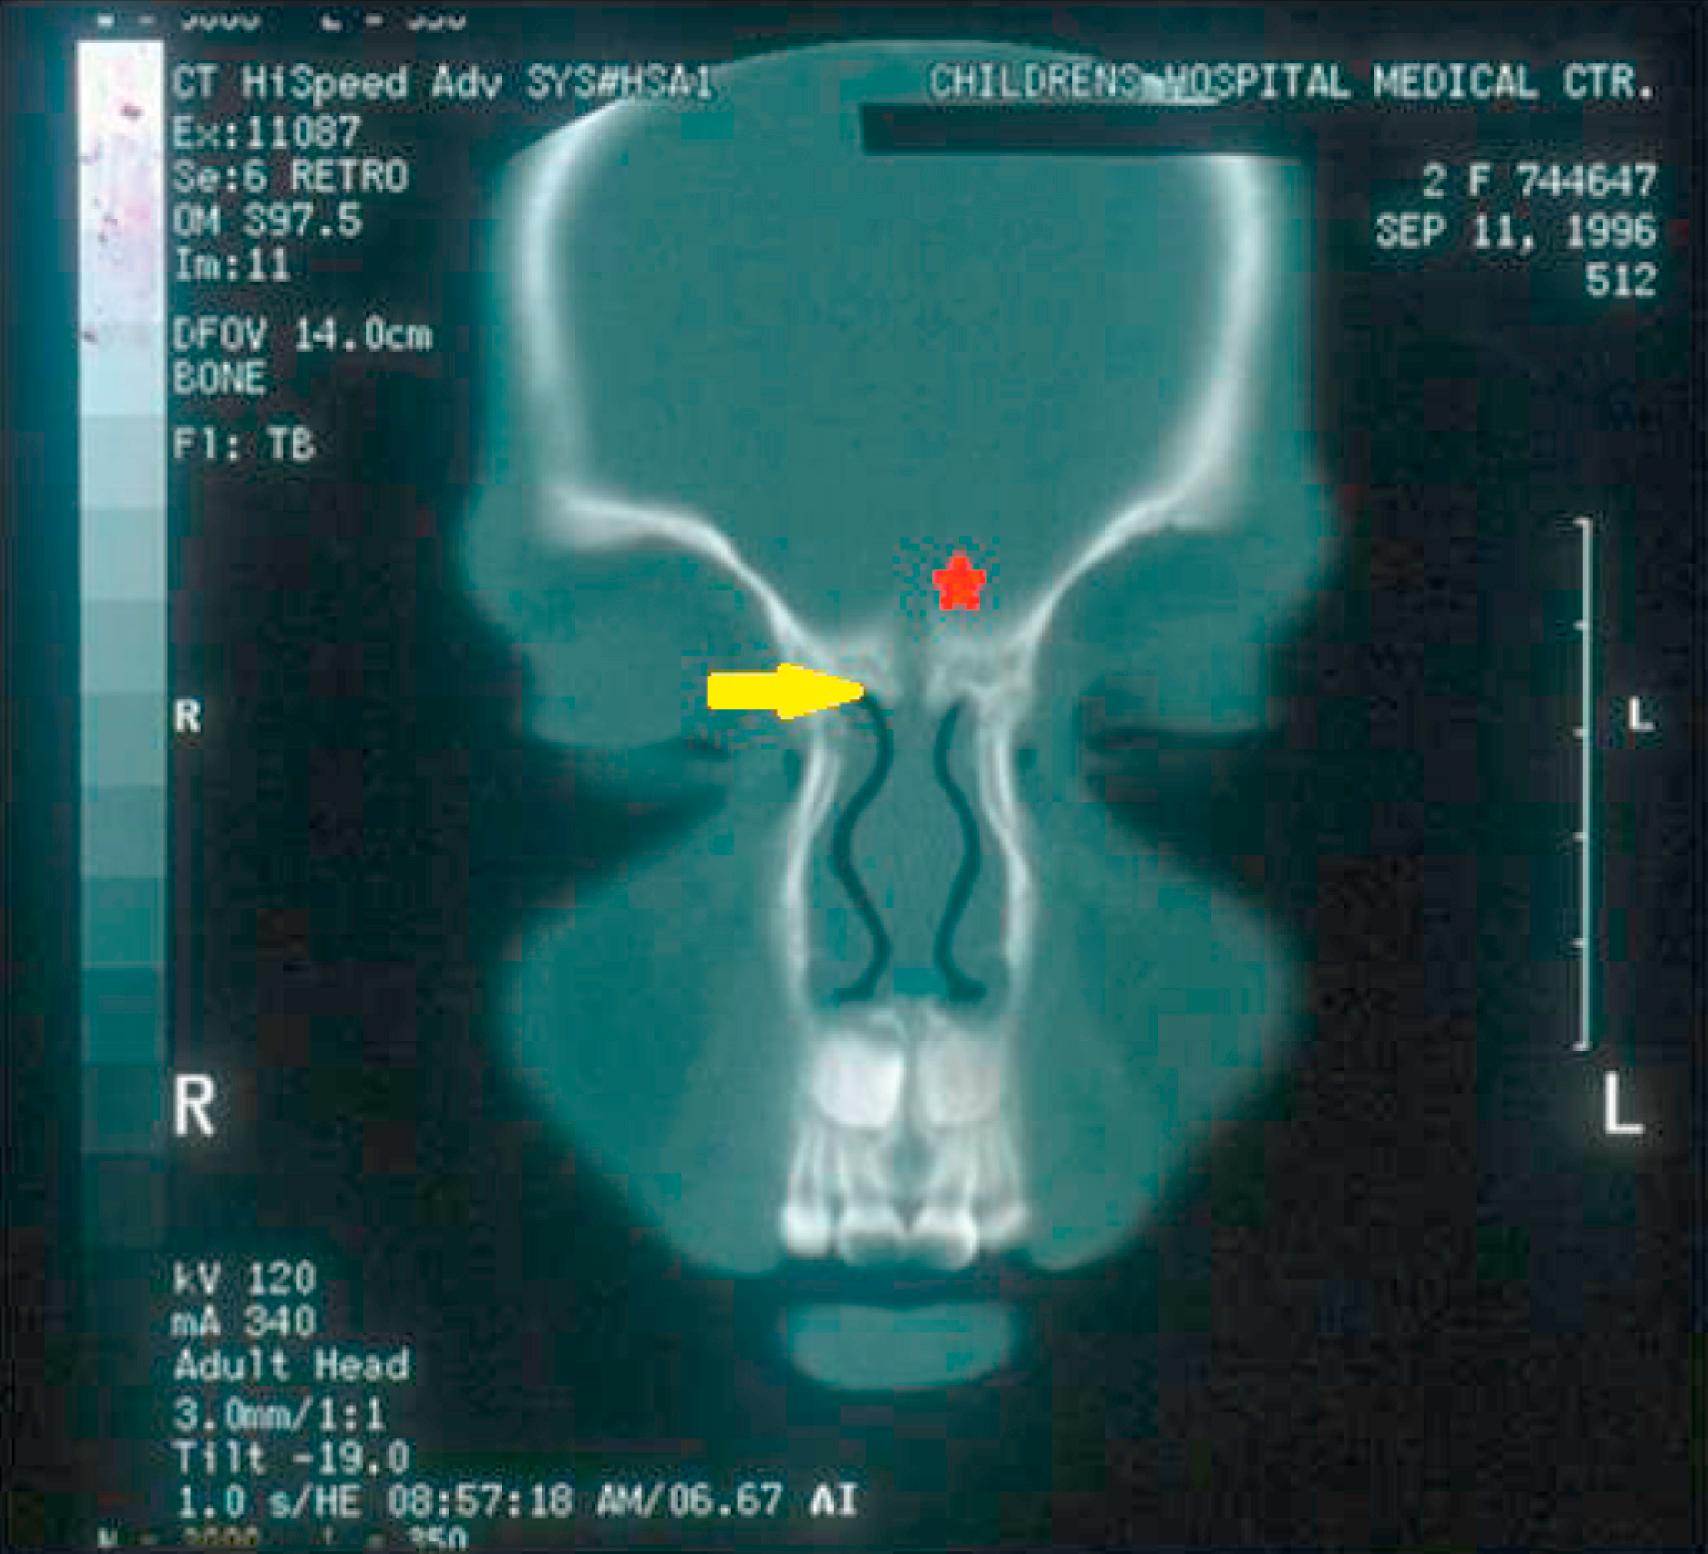 Fig. 5.6, Coronal computed tomography scan showing a bifid crista galli (red star) and an enlarged foramen cecum (yellow arrow).